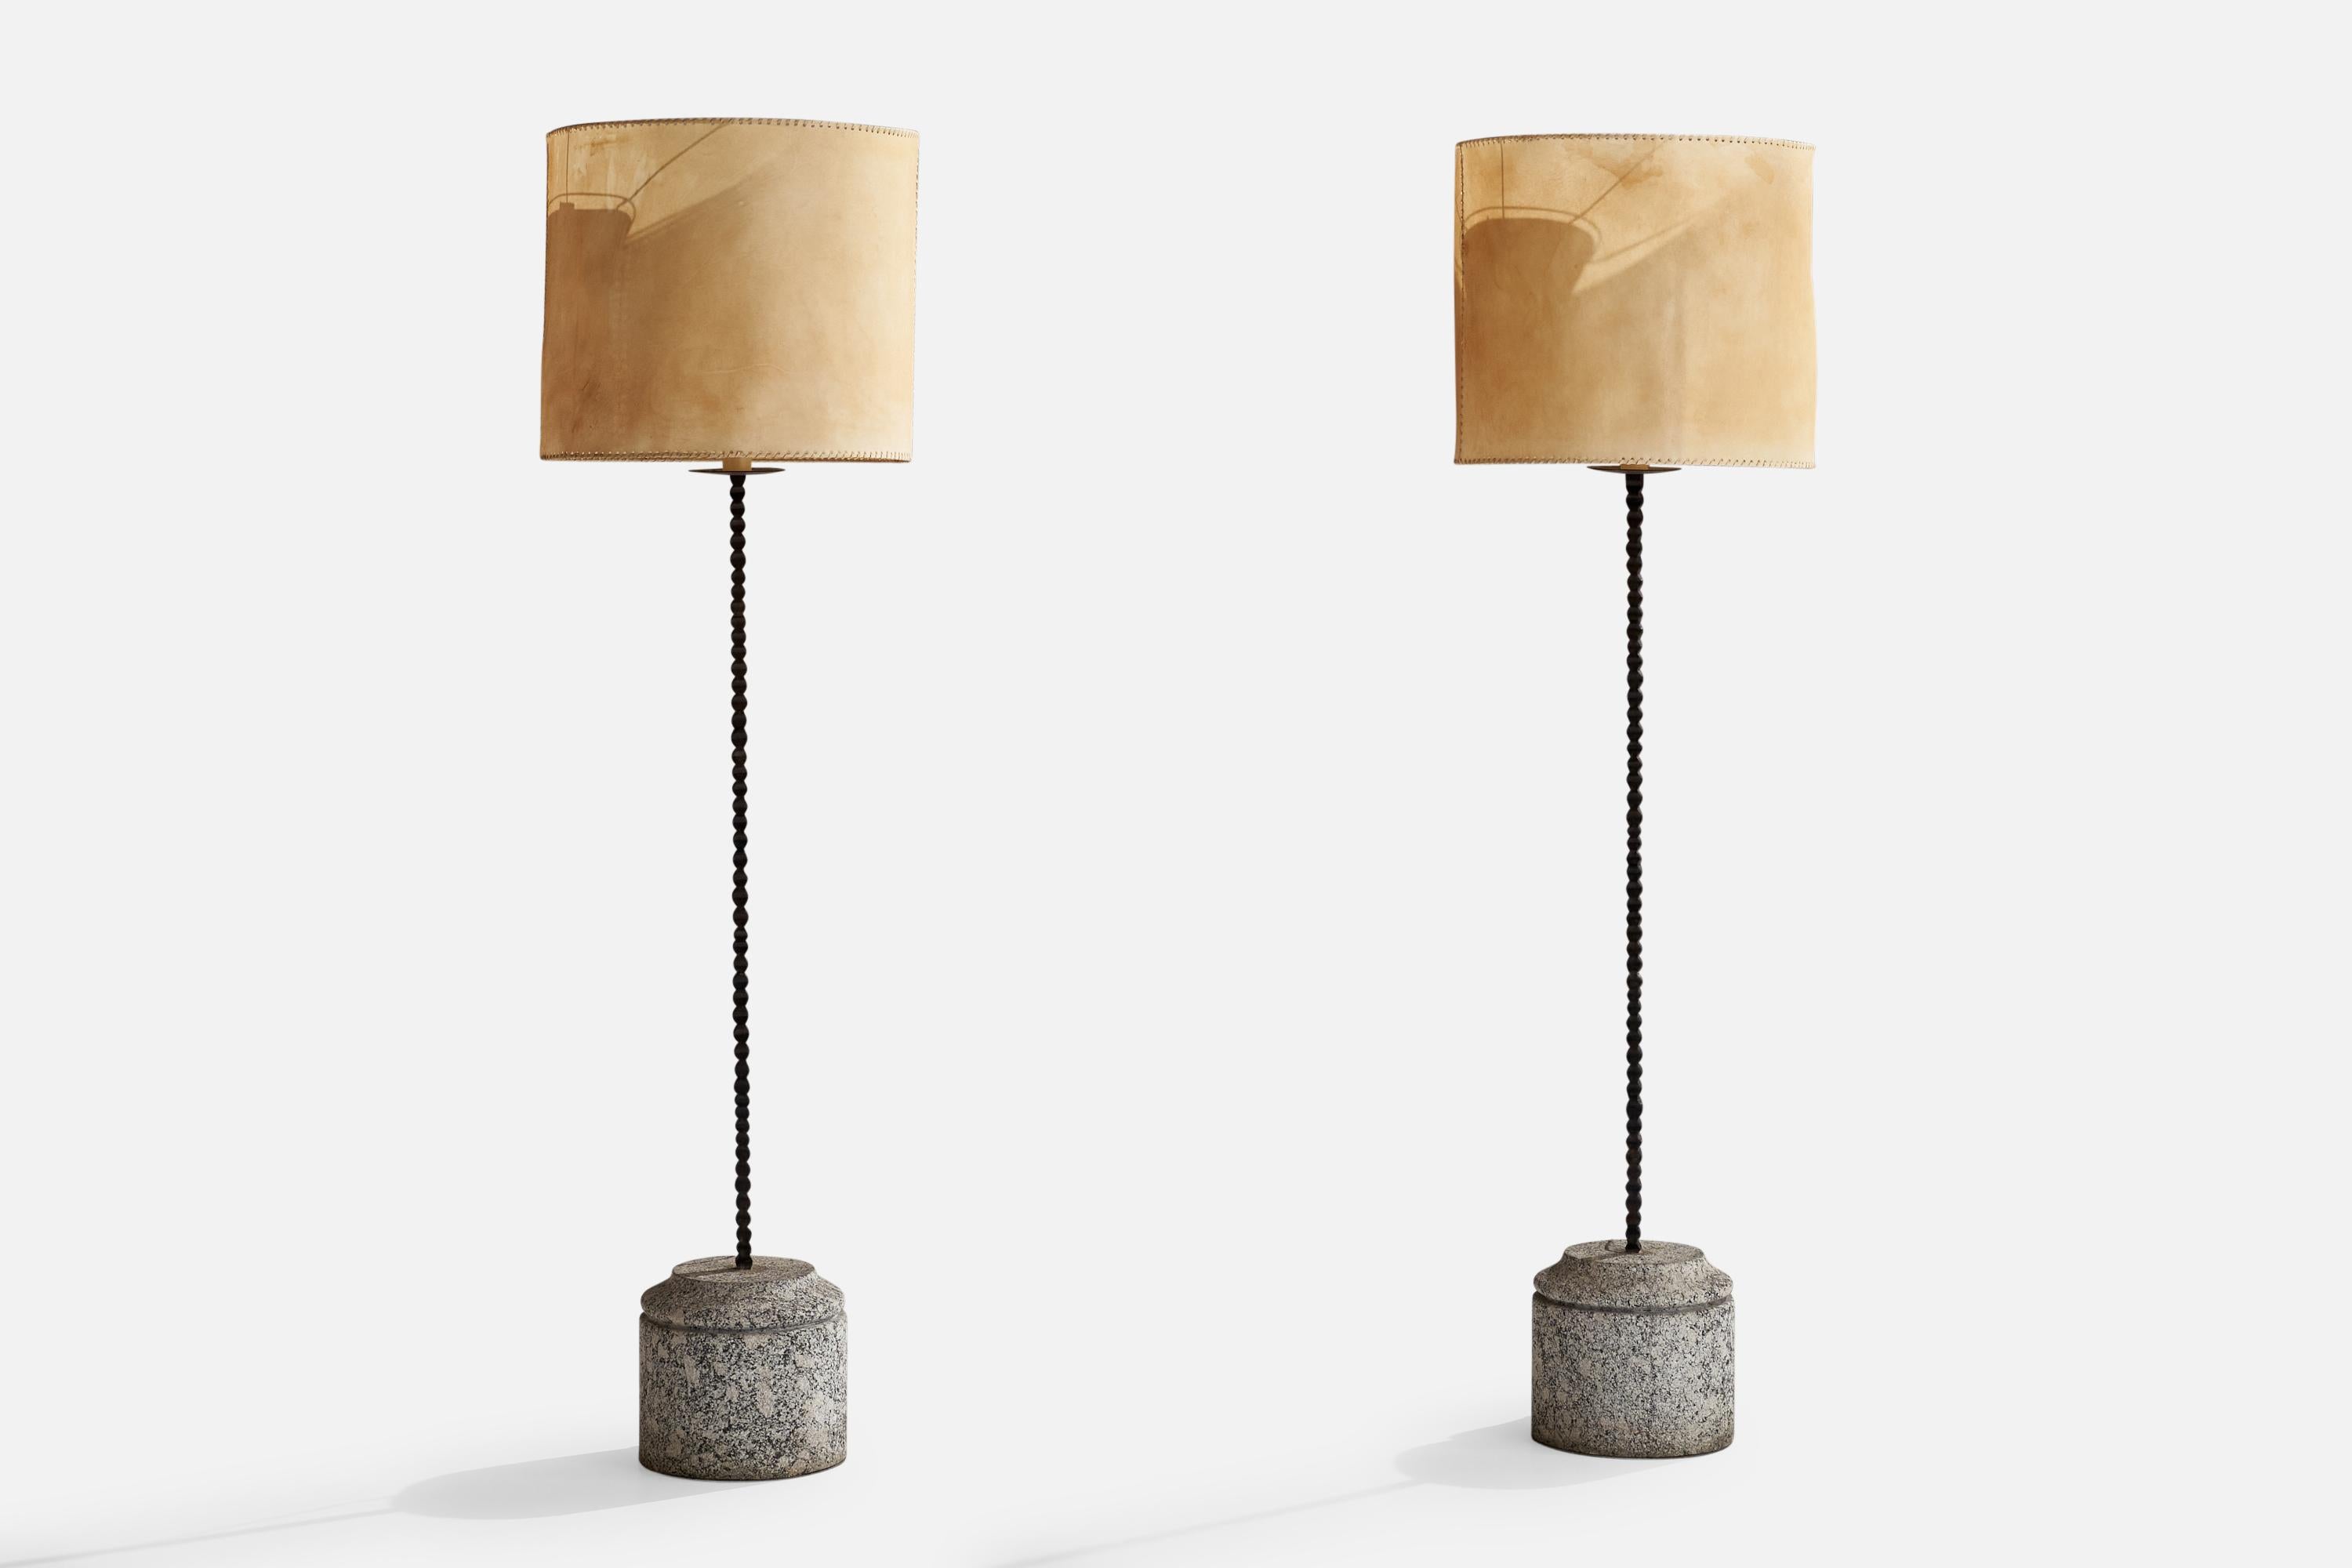 A pair of black-painted iron, granite and goat parchment floor lamps, custom-designed and produced for a private apartment in Milan, Italy, 1950s.

Overall Dimensions (inches): 71” H x 20” W x 9” D
Stated dimensions include shade.
Bulb